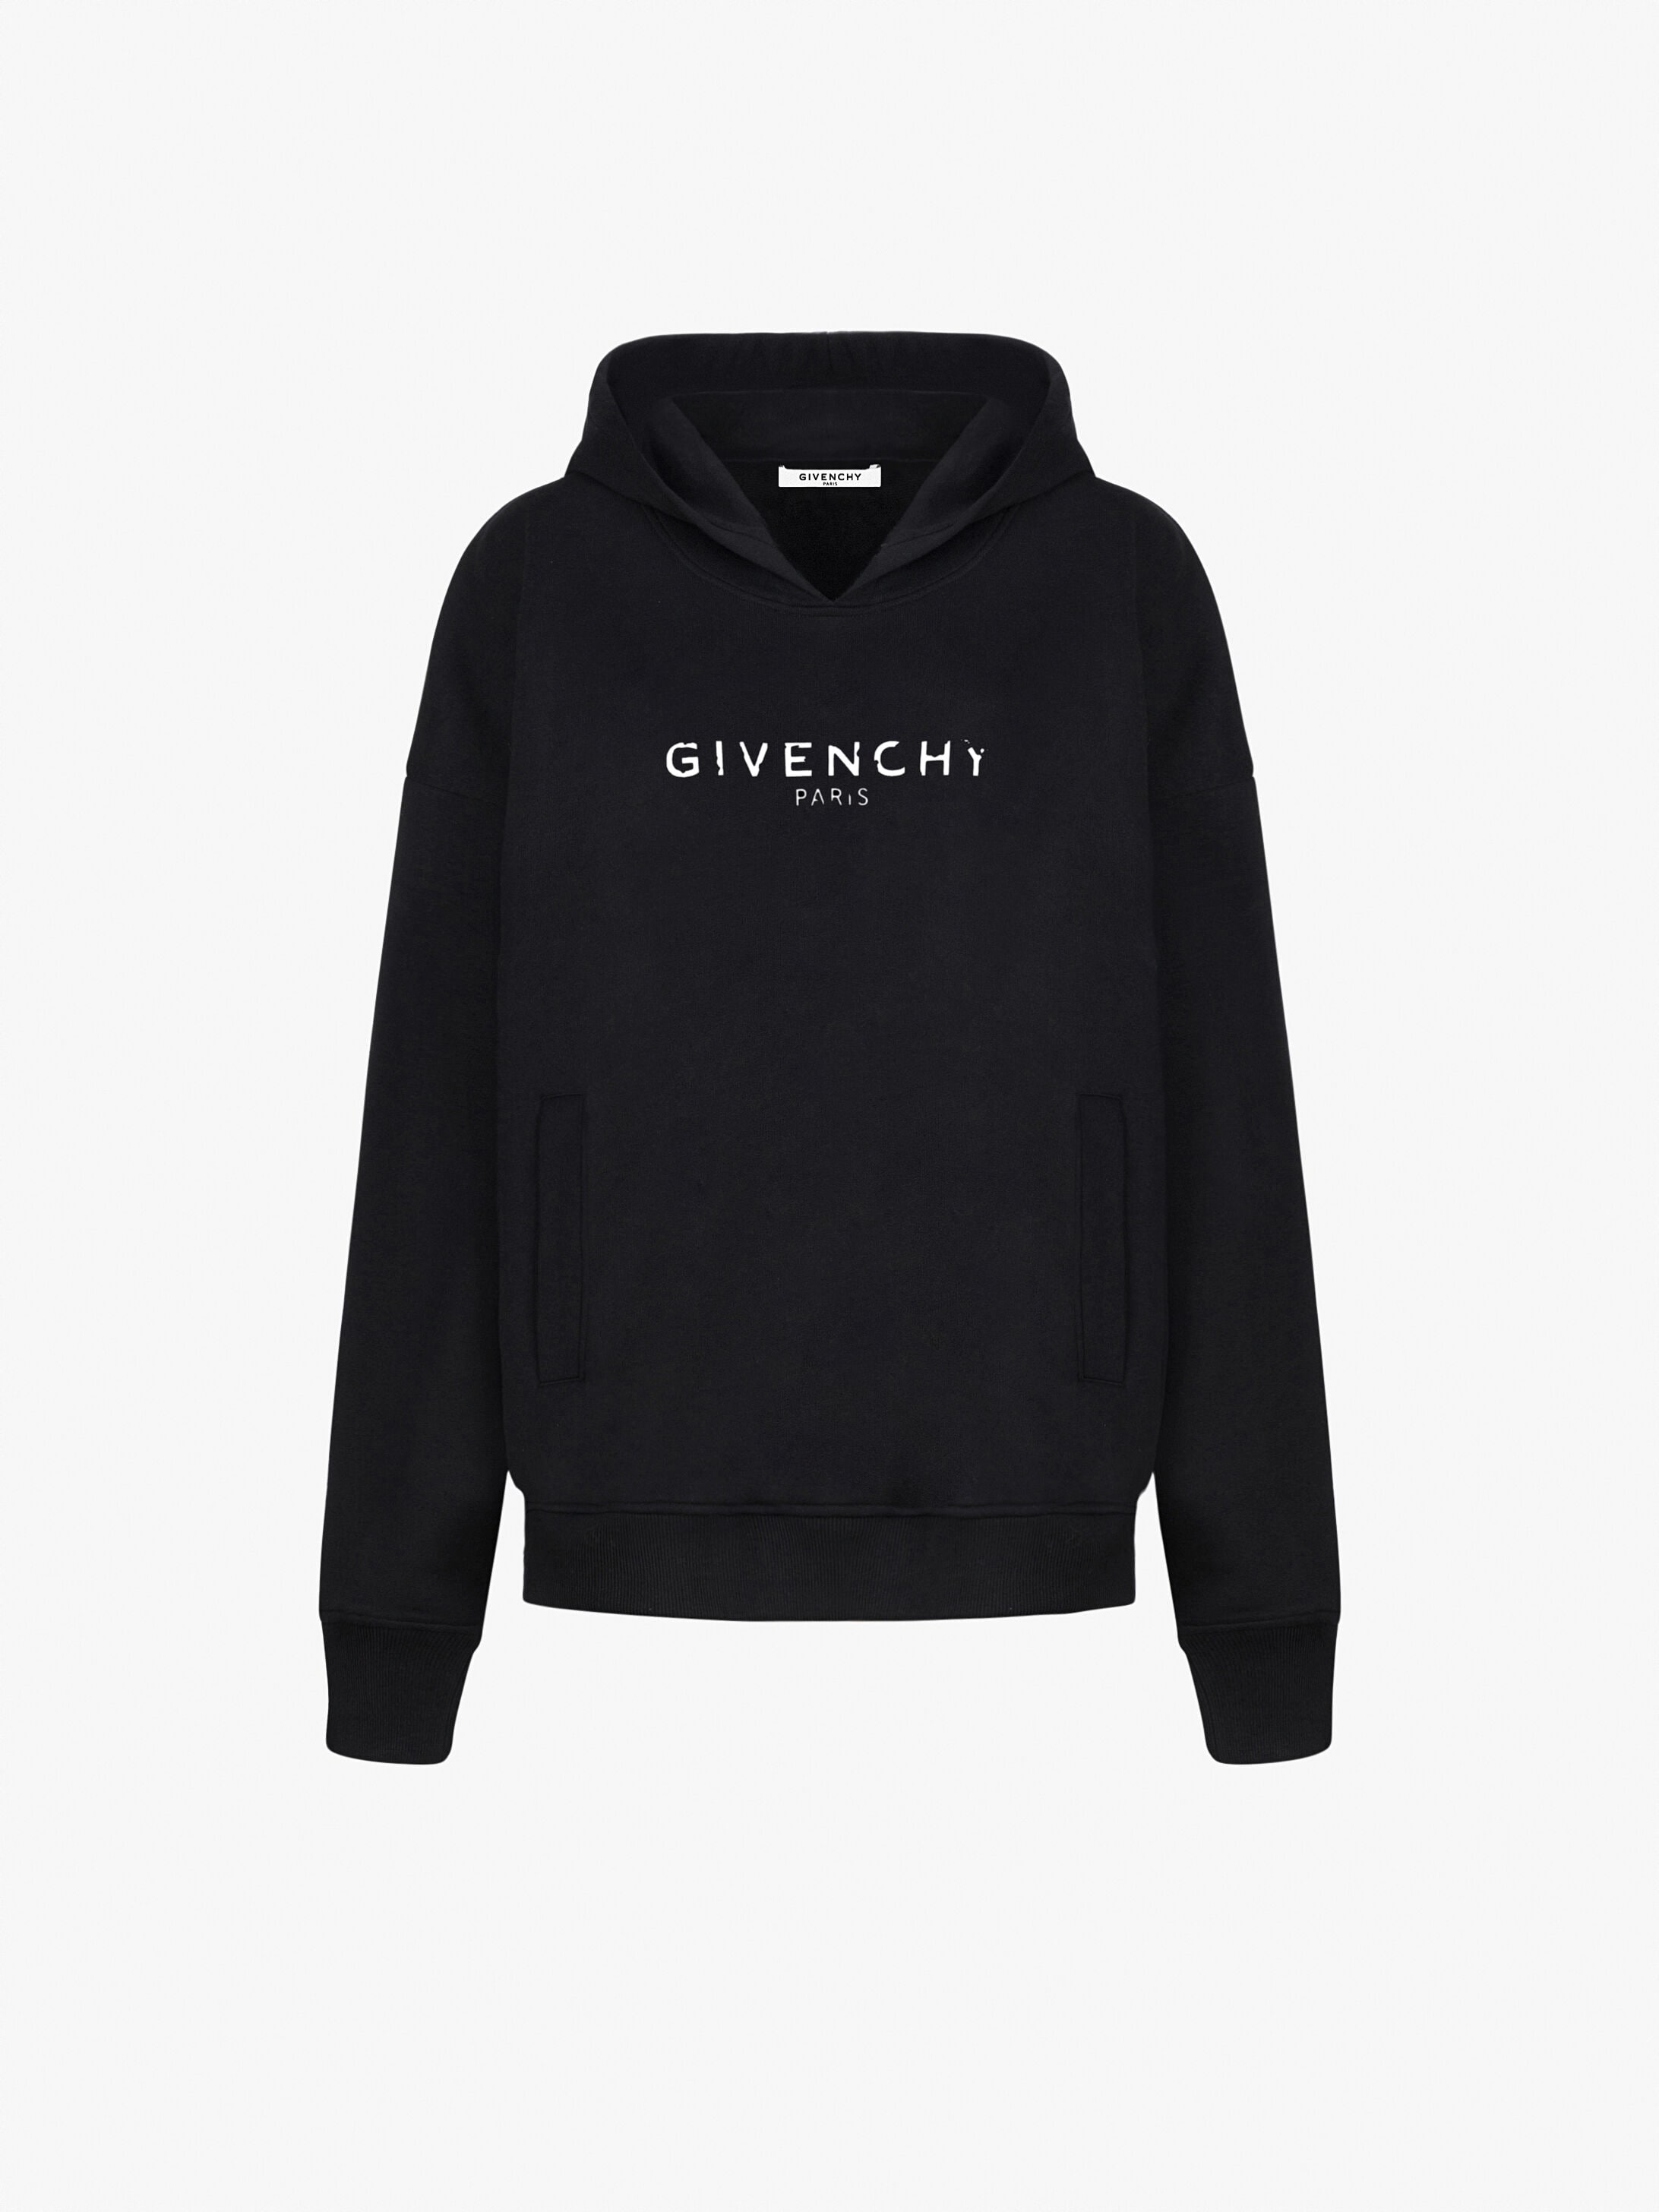 black and white givenchy jumper